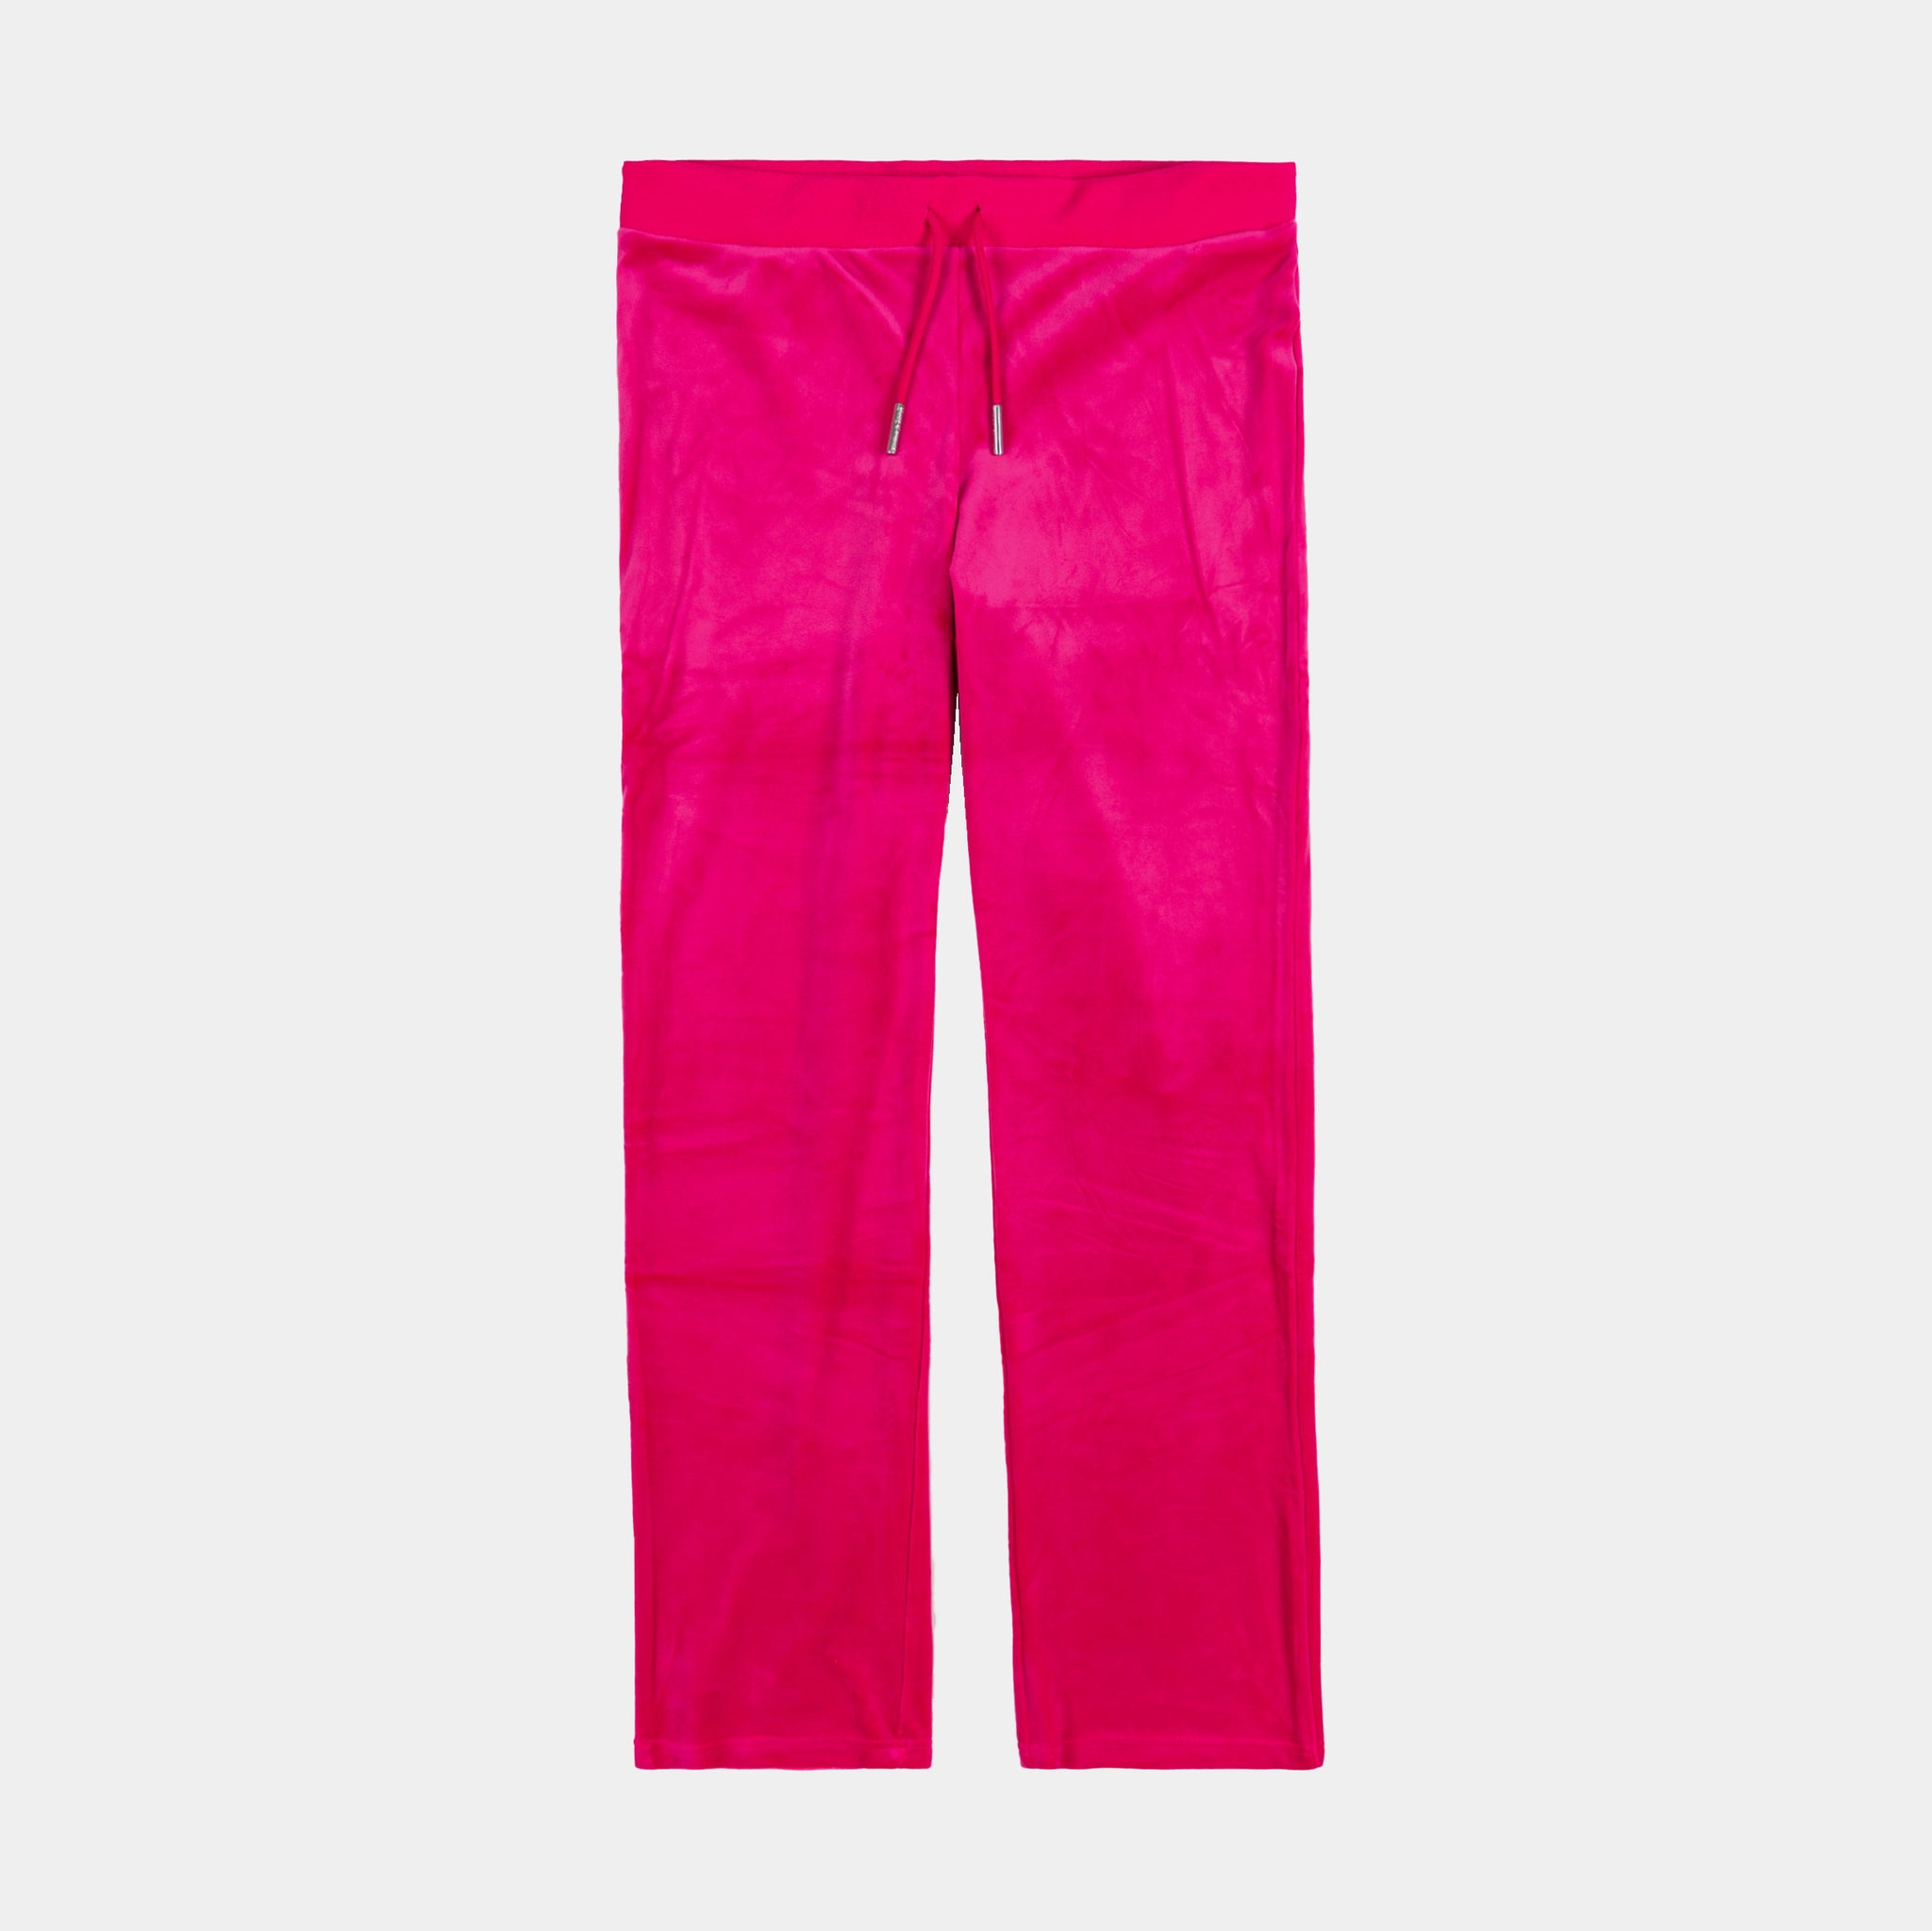 JUICY COUTURE OG Big Bling Womens Velour Track Pants - PINK